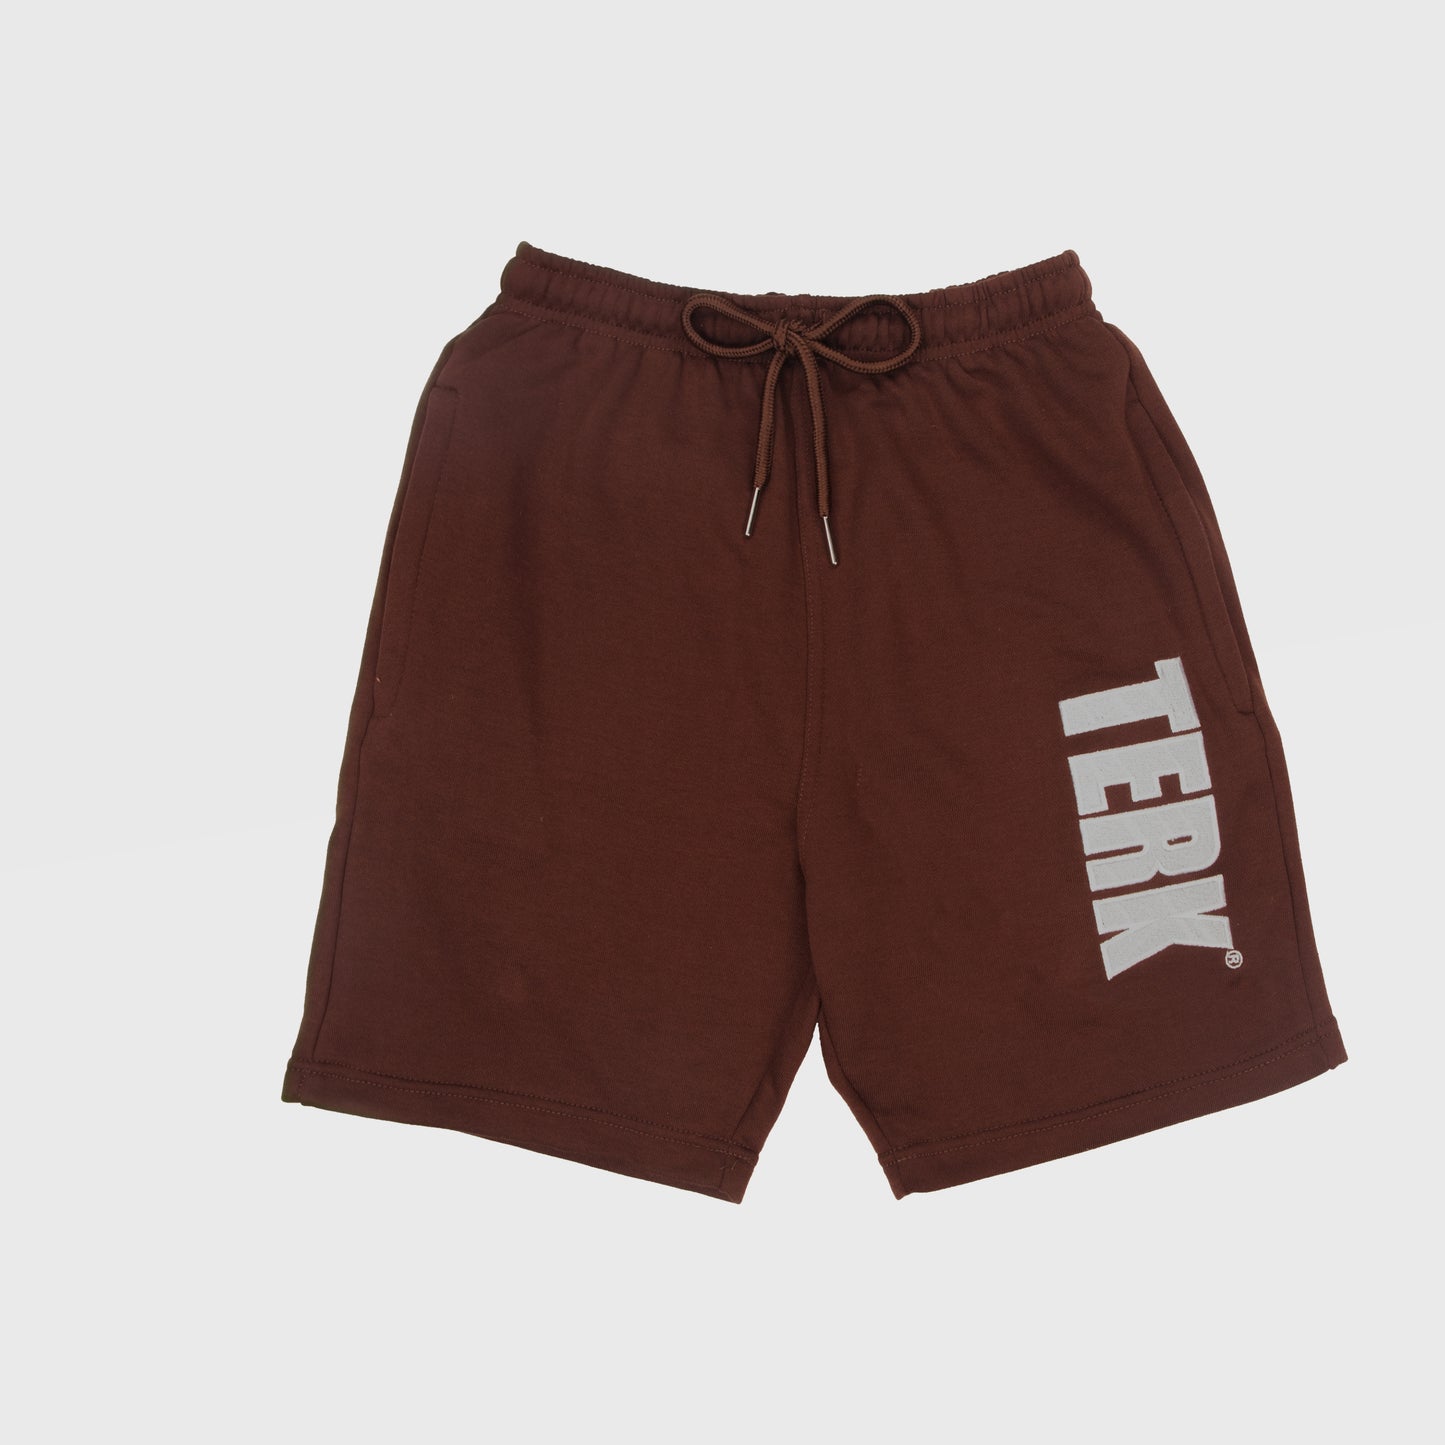 CHOCOLATE SOLID SWEAT SHORTS WITH WHITETERK EMBROIDERED LOGO